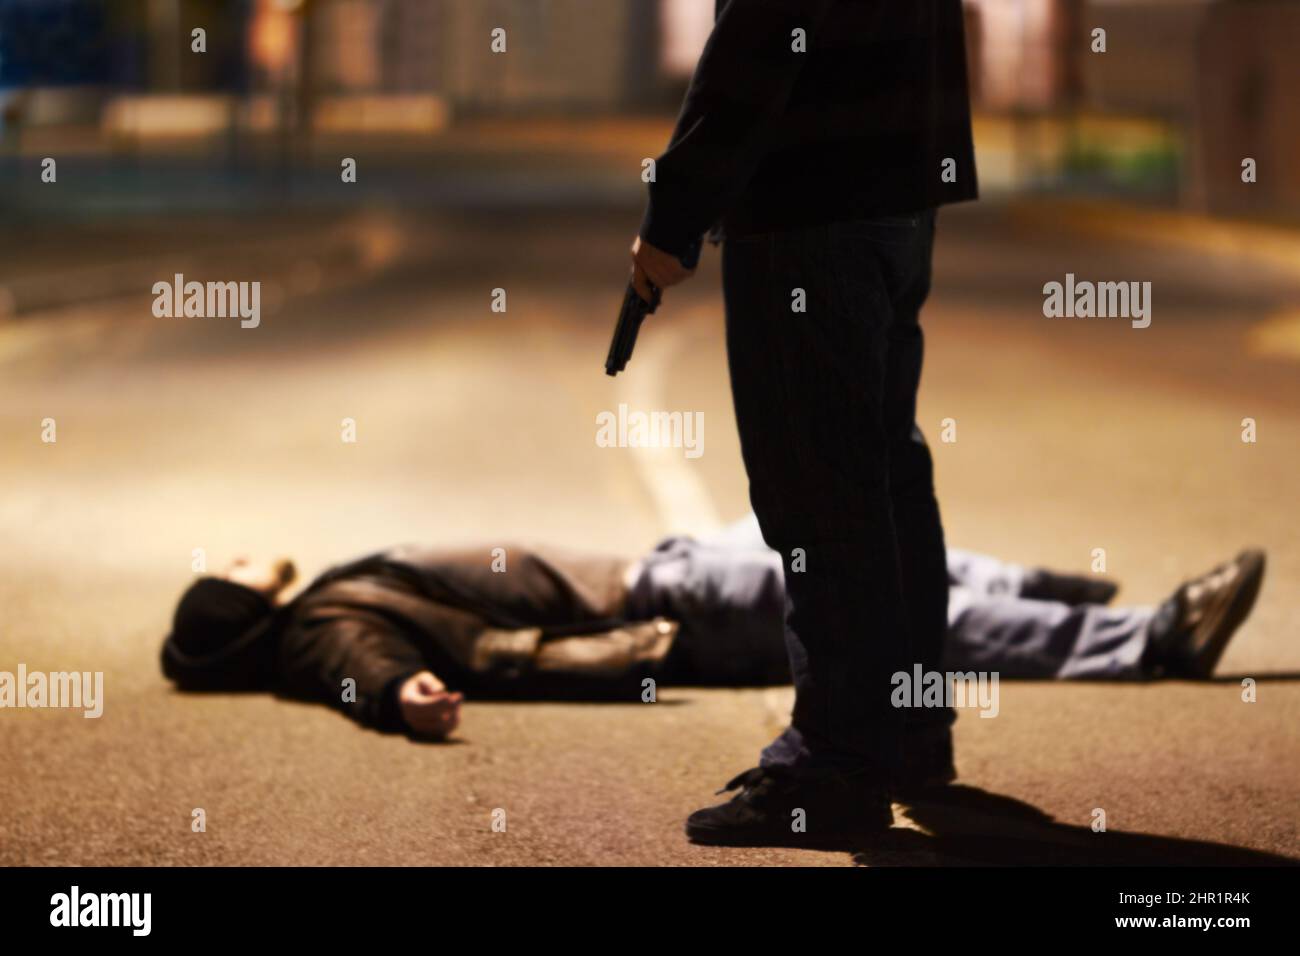 Acts of violence. Man lying on the ground after being shot by a gun-wielding criminal. Stock Photo